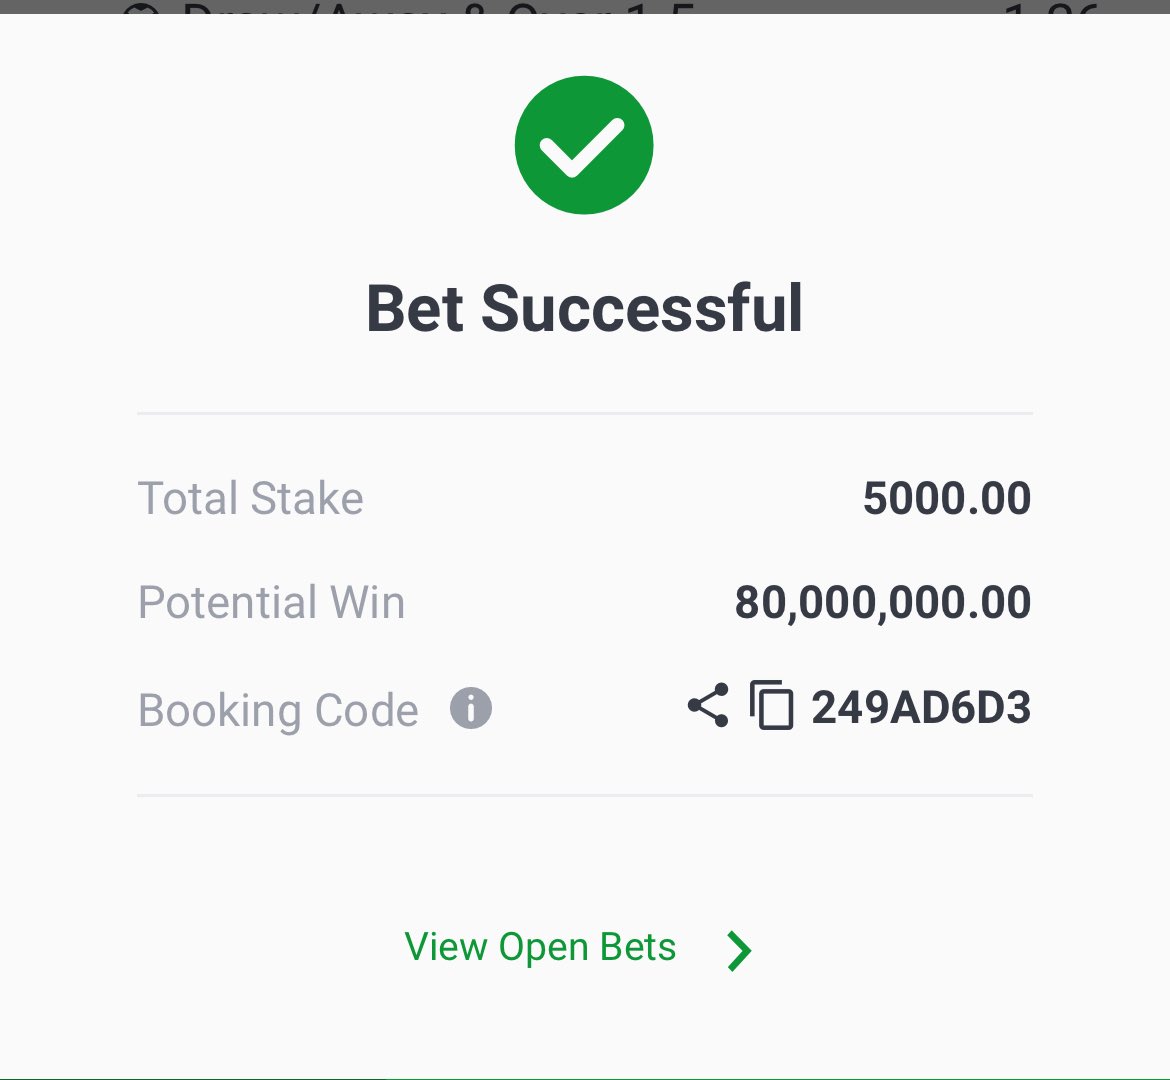 Sportybet: 900F27, 249AD6D3 200 odds posted on Tel: t.me/cindymonel One big win this month 🤲🏻